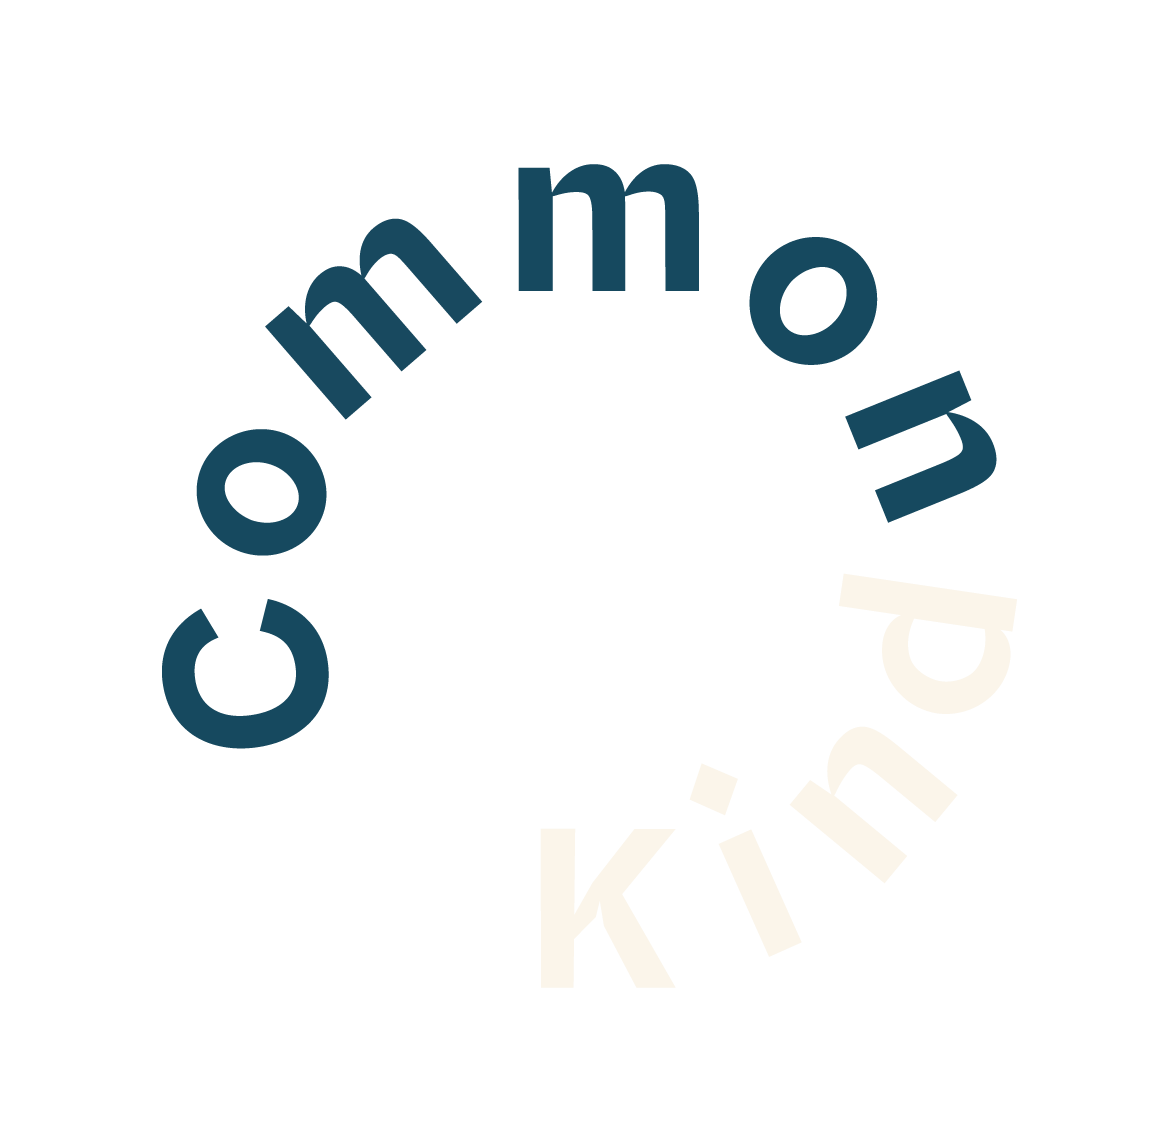 CommonKind - Sharing Joy and Warmth